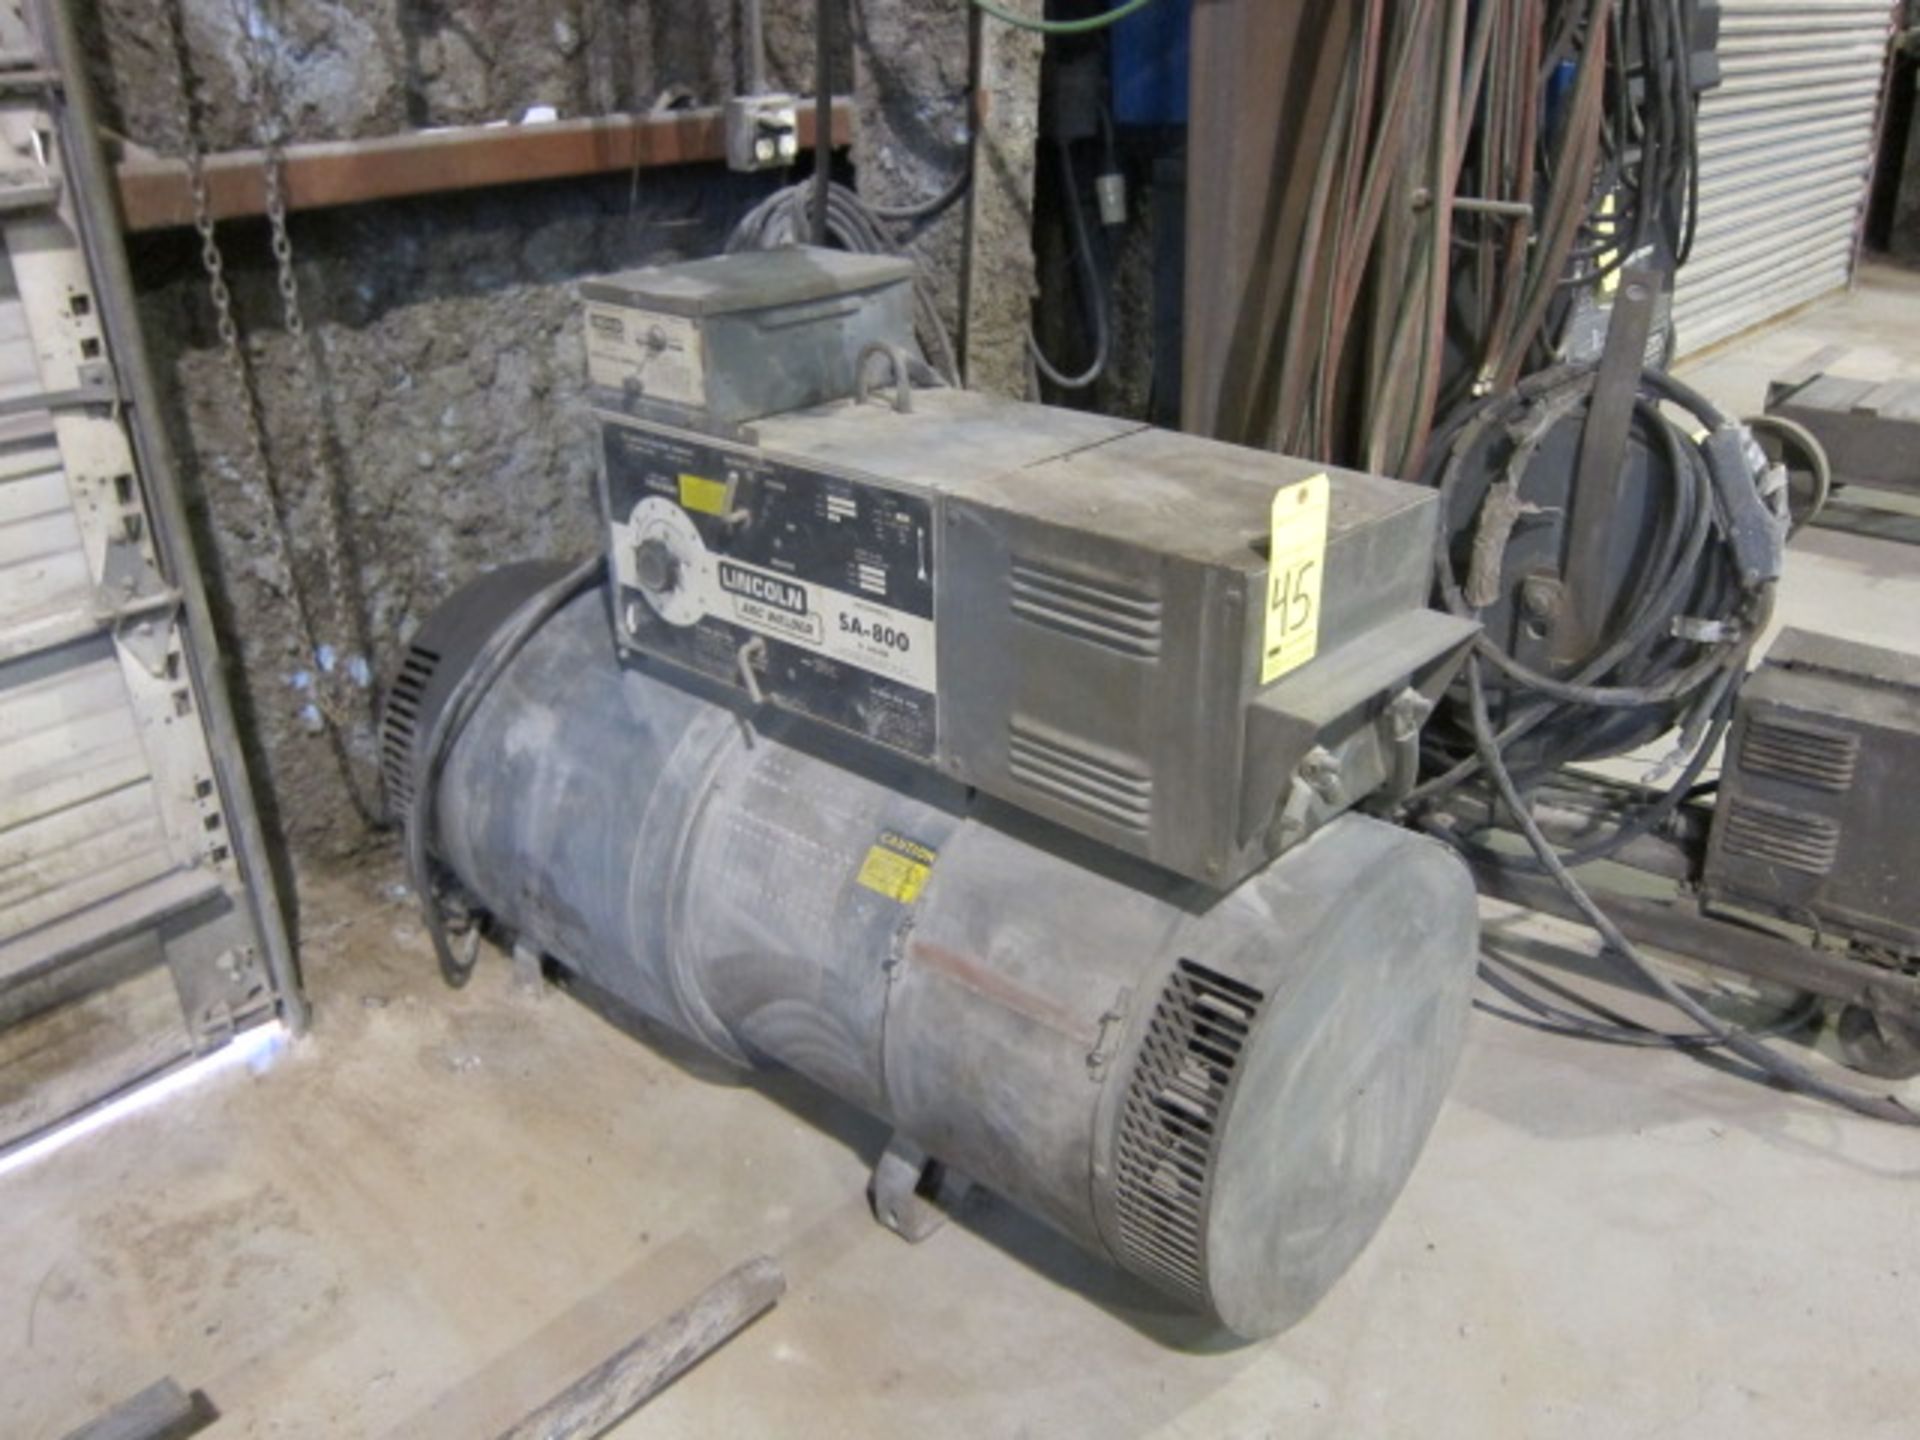 MOTOR/GENERATOR WELDER, LINCOLN MDL. SA800, 800 amps @ 44 v. output, 60% duty cycle, Lincoln LN8